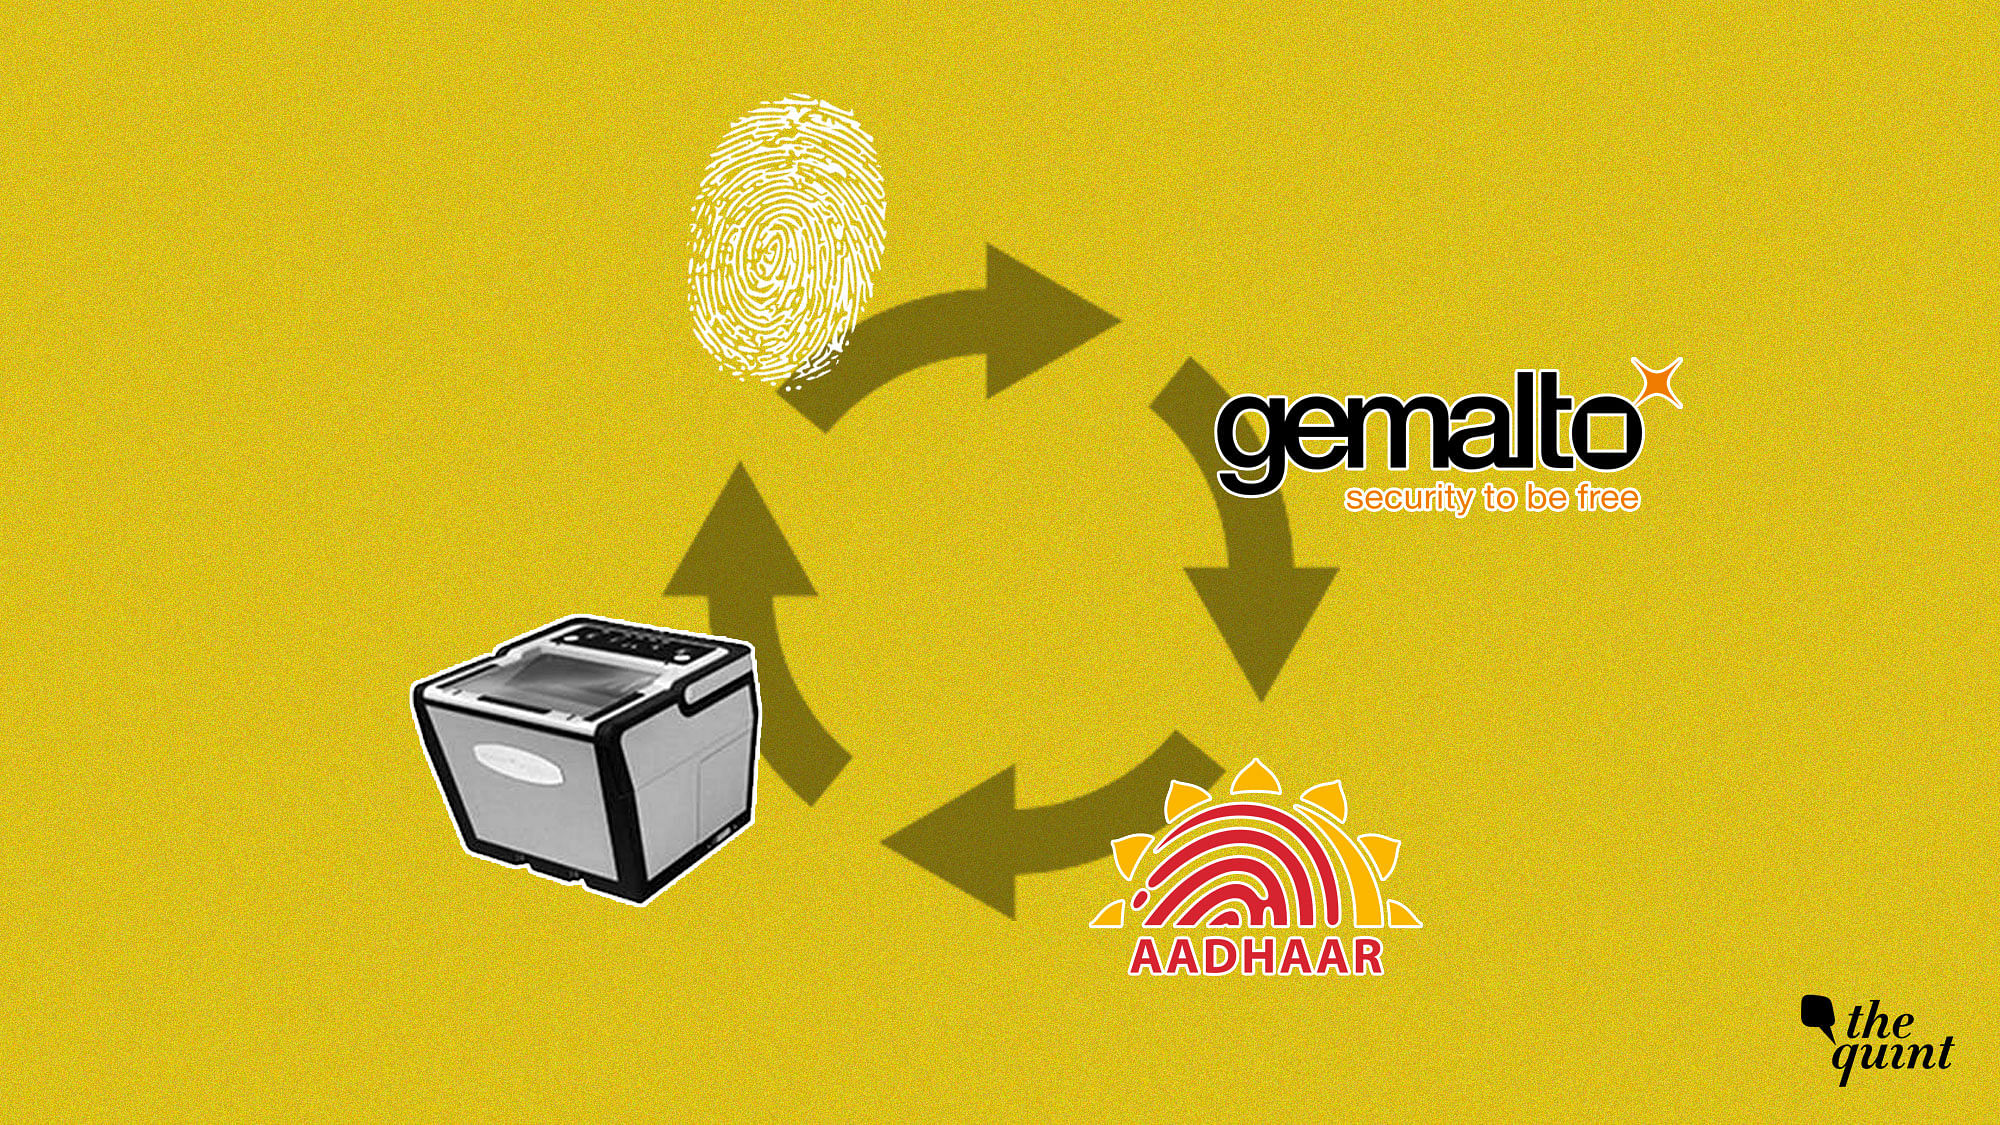 UIDAI uses Gemalto machines to capture and authenticate biometric information of citizens, a fact the security company omitted from its apology on Saturday.